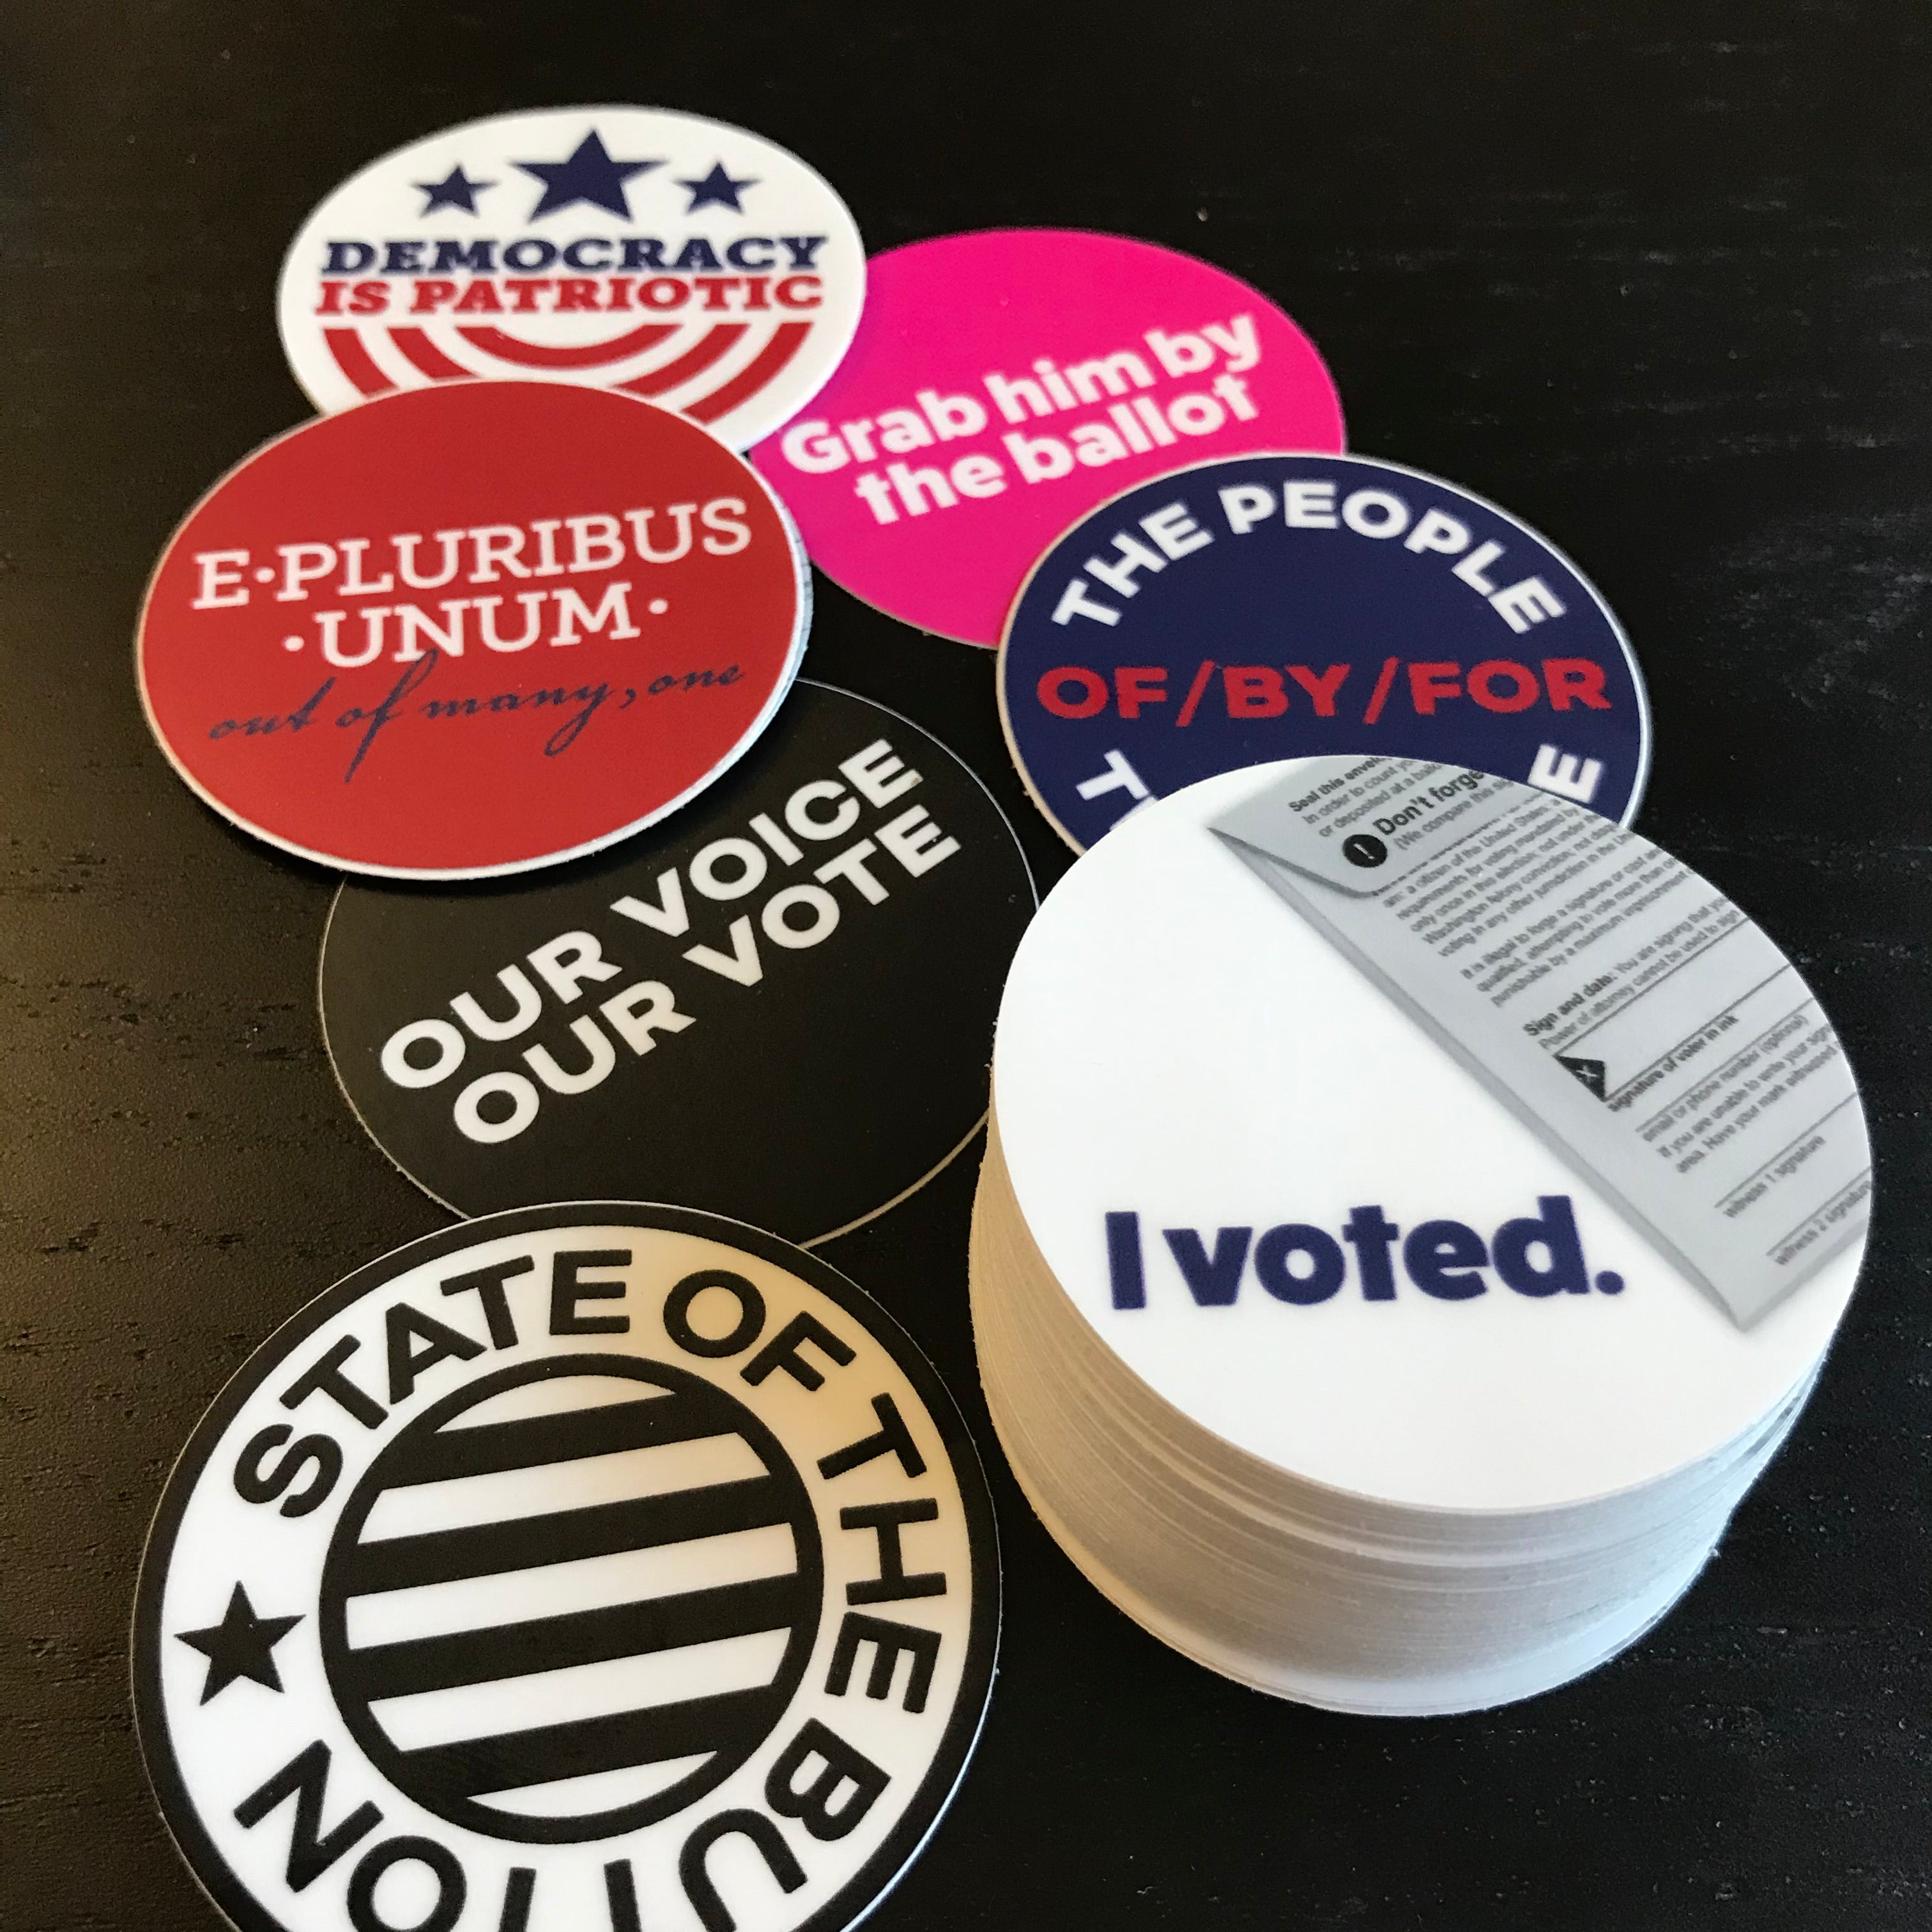 I VOTED Stickers